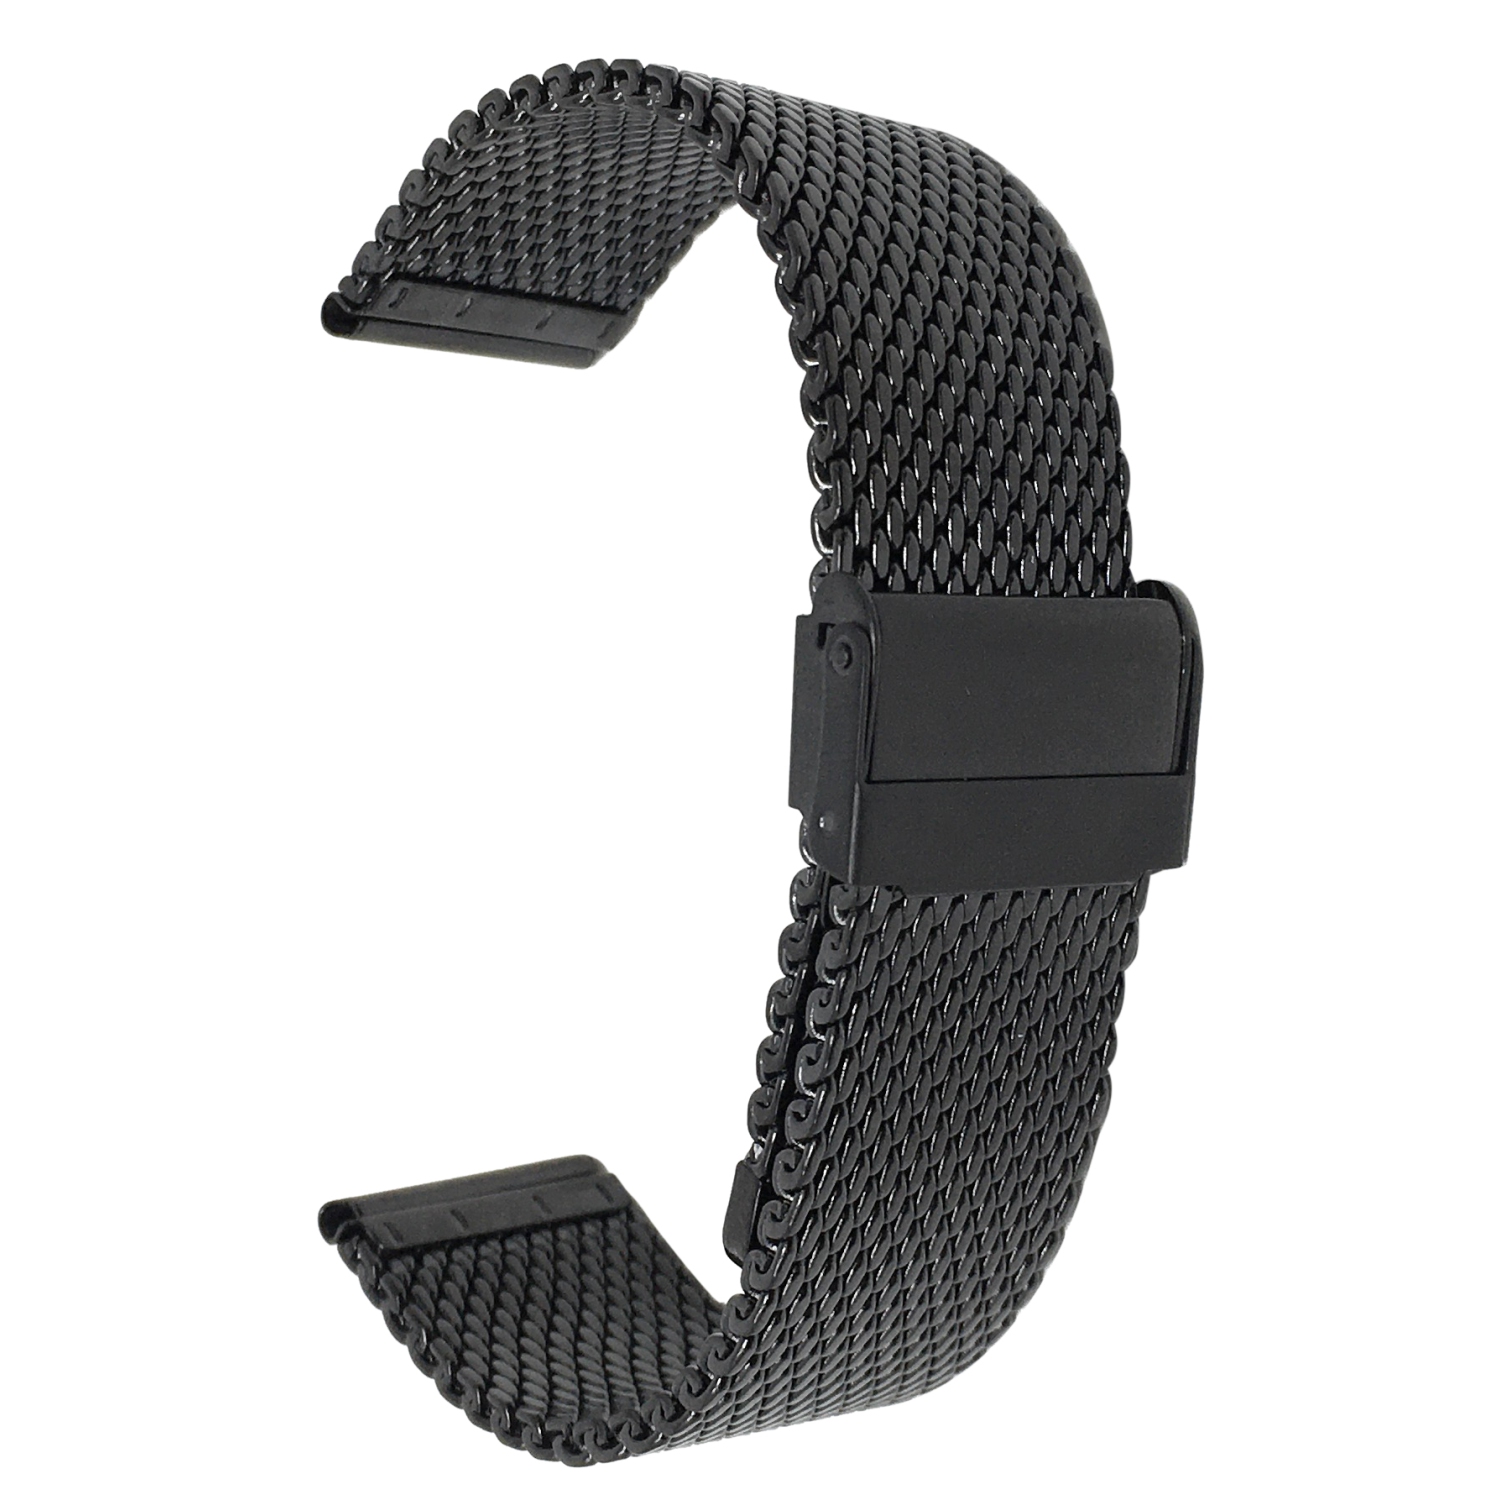 Bandini Mens Stainless Steel MIlanese Thick Mesh Smart Watch Band Strap For Mobvoi Ticwatch E2, S2, Pro, Pro 3 - 22mm, Black